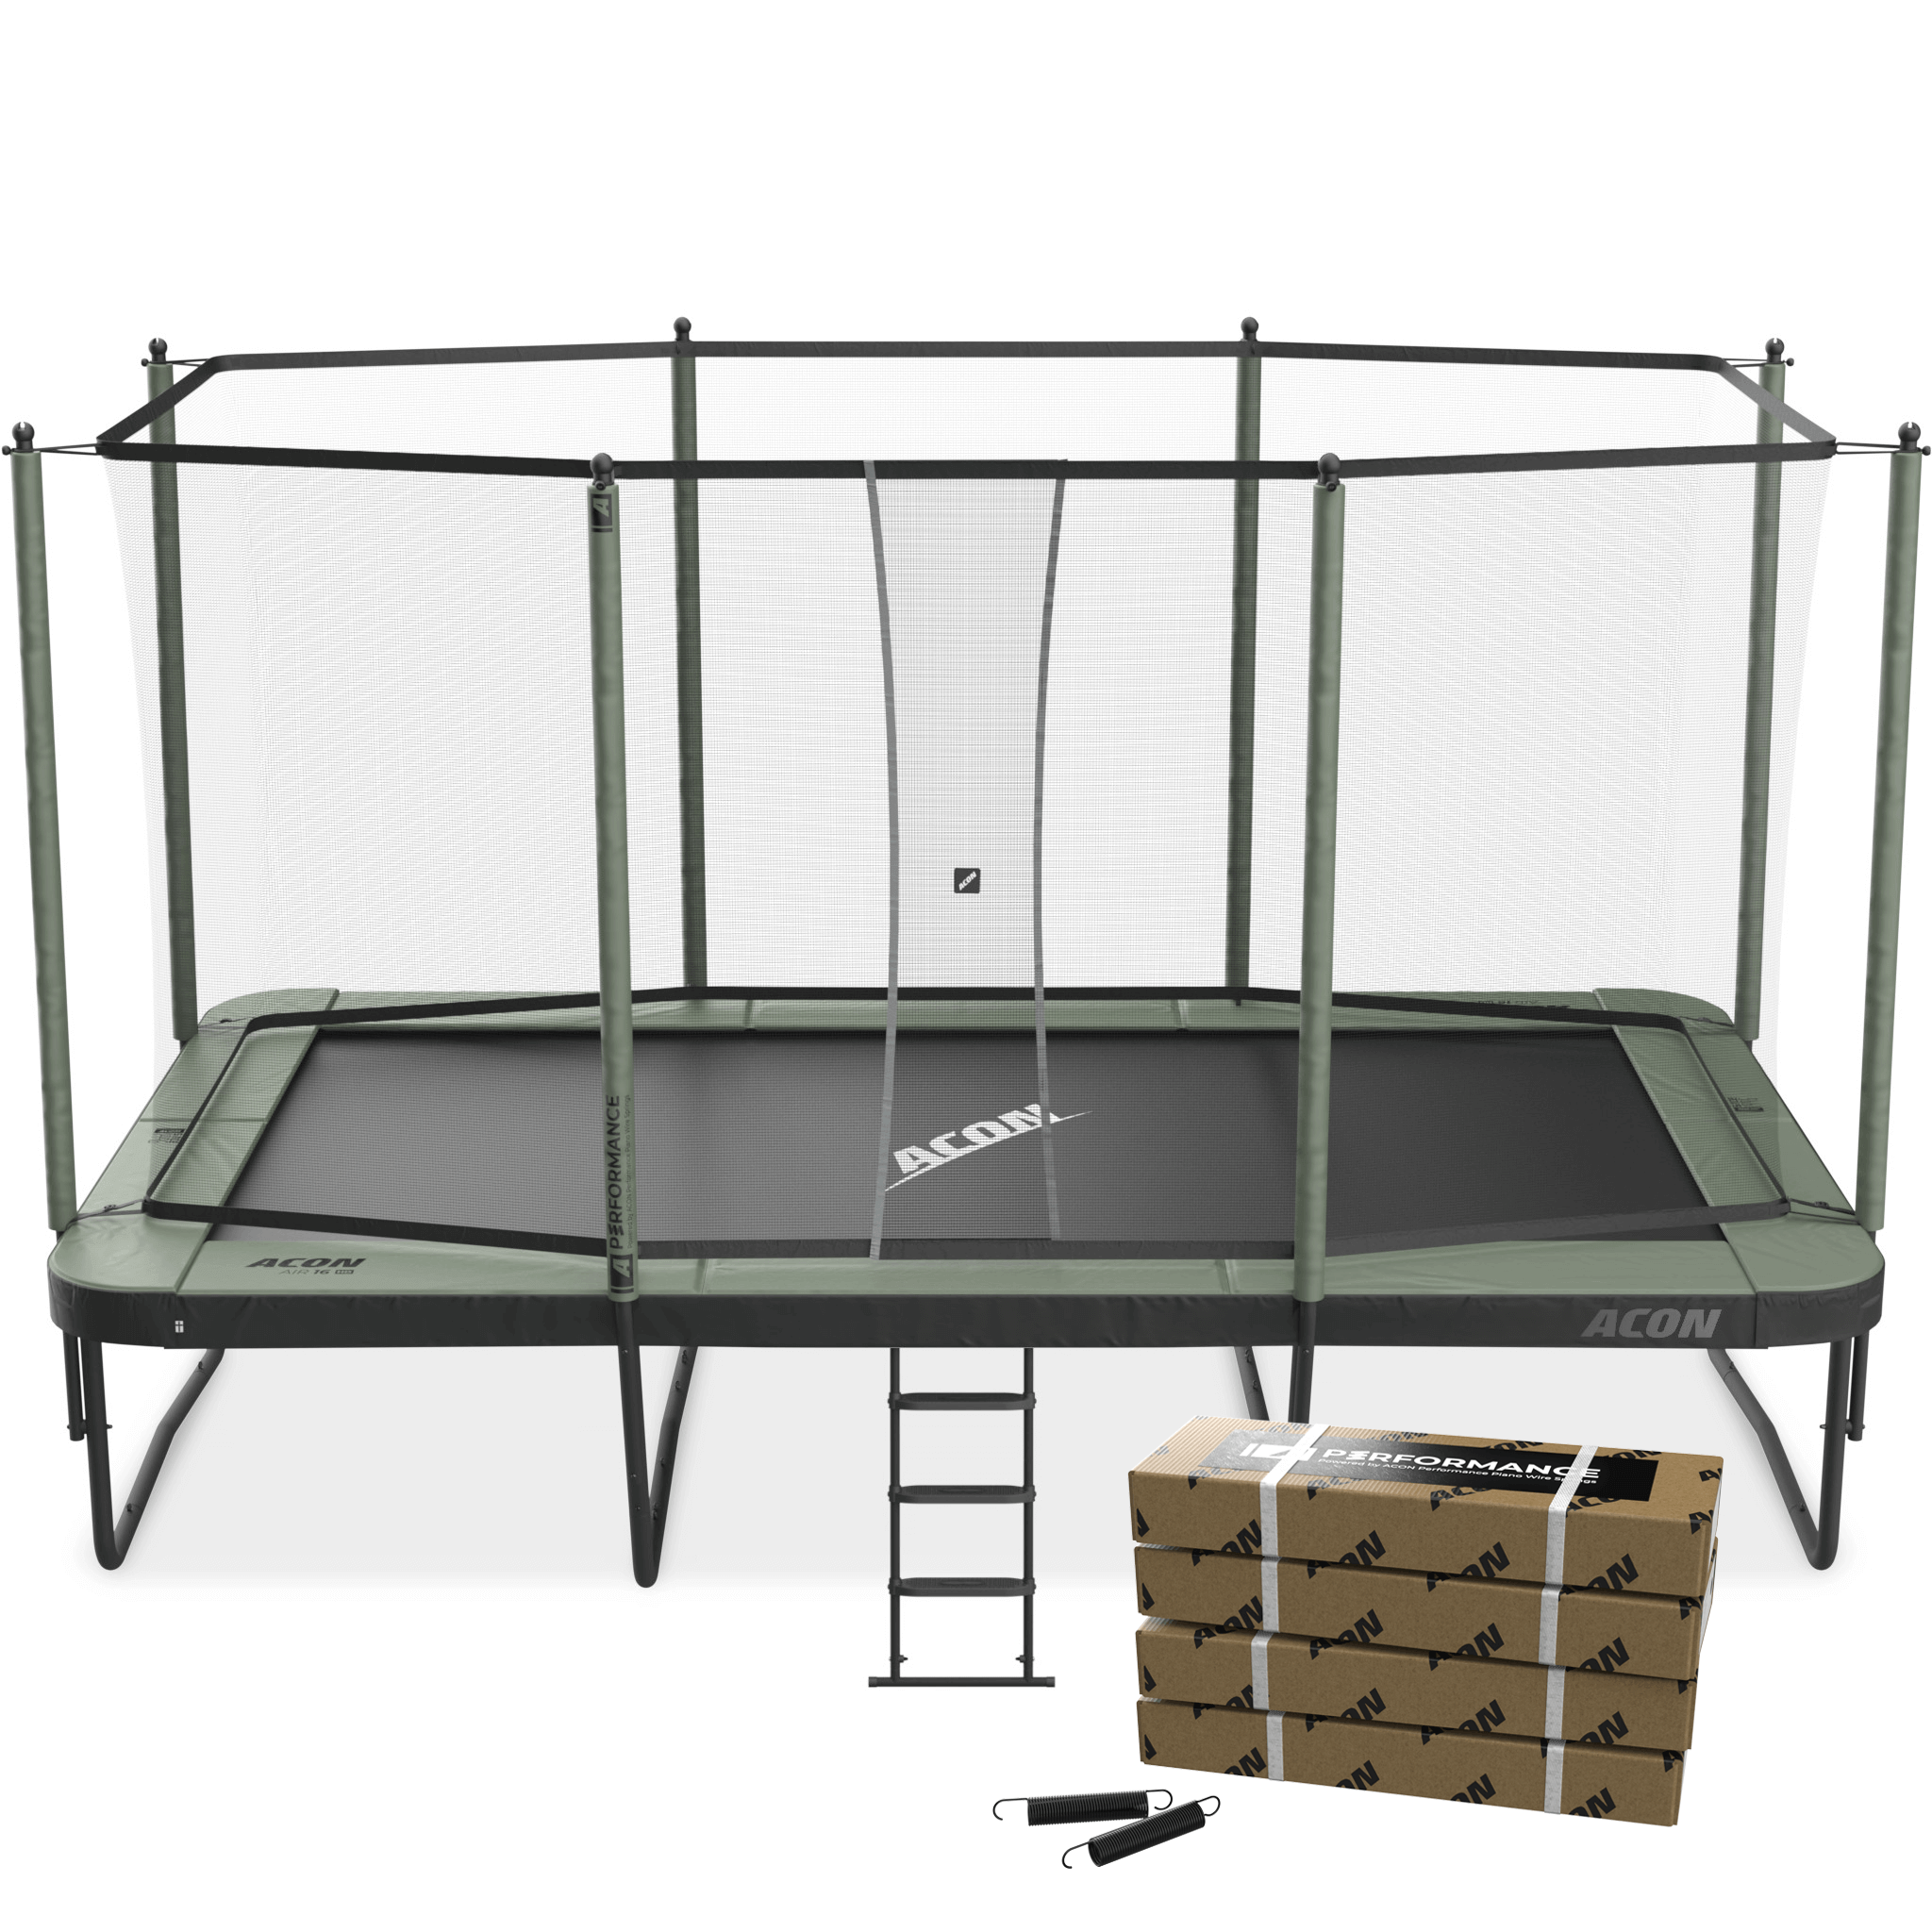  Upper Bounce Rectangle Trampoline Outdoor Set with